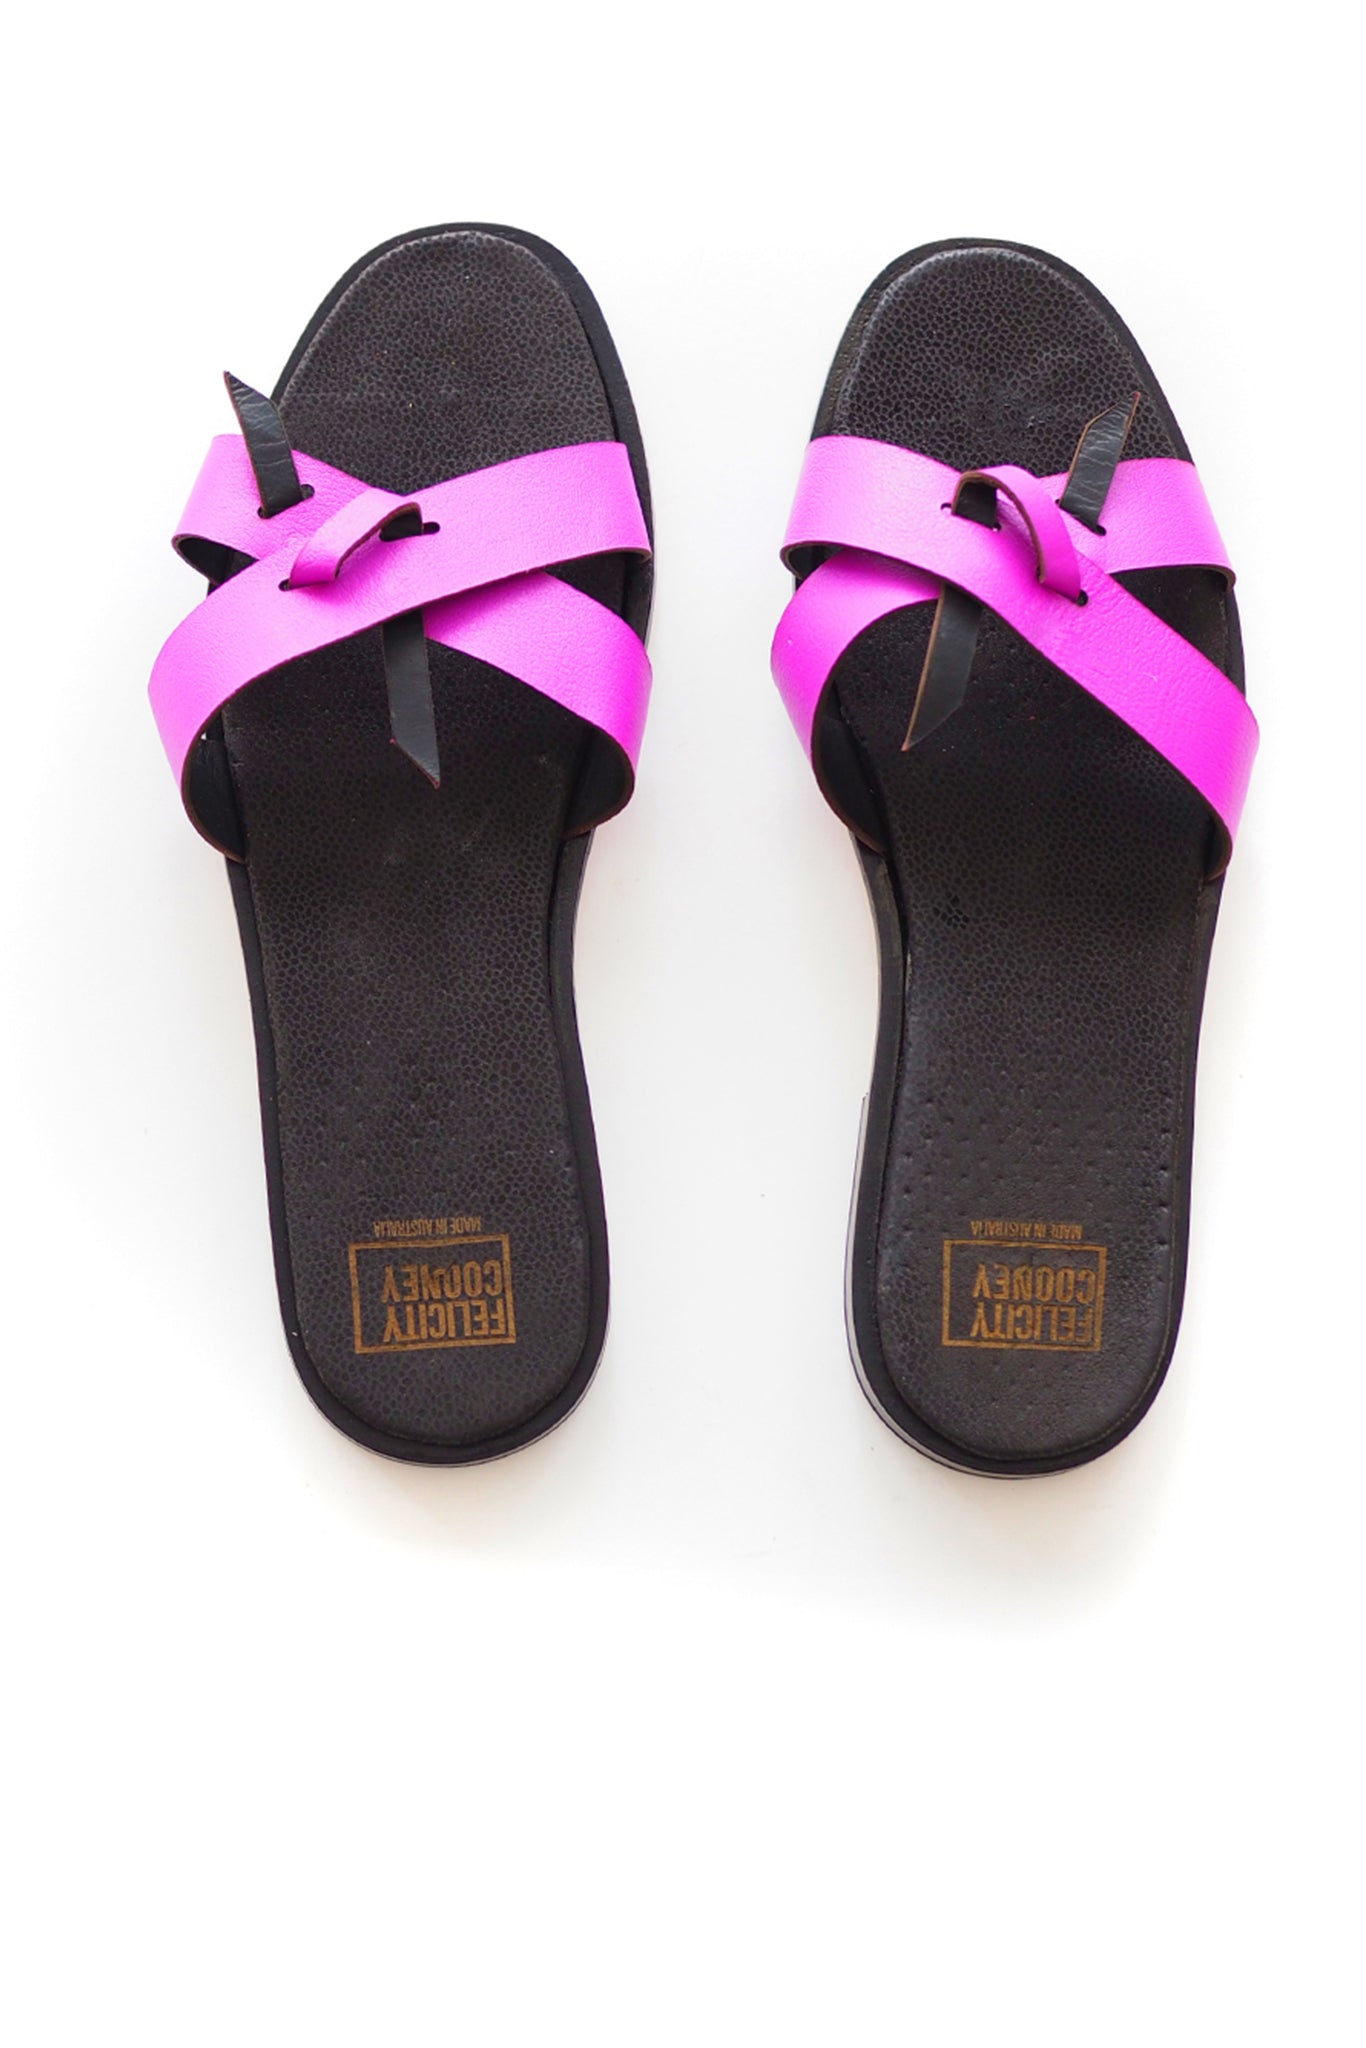 Yen Sandal in Orchid (Size 10 and 11)